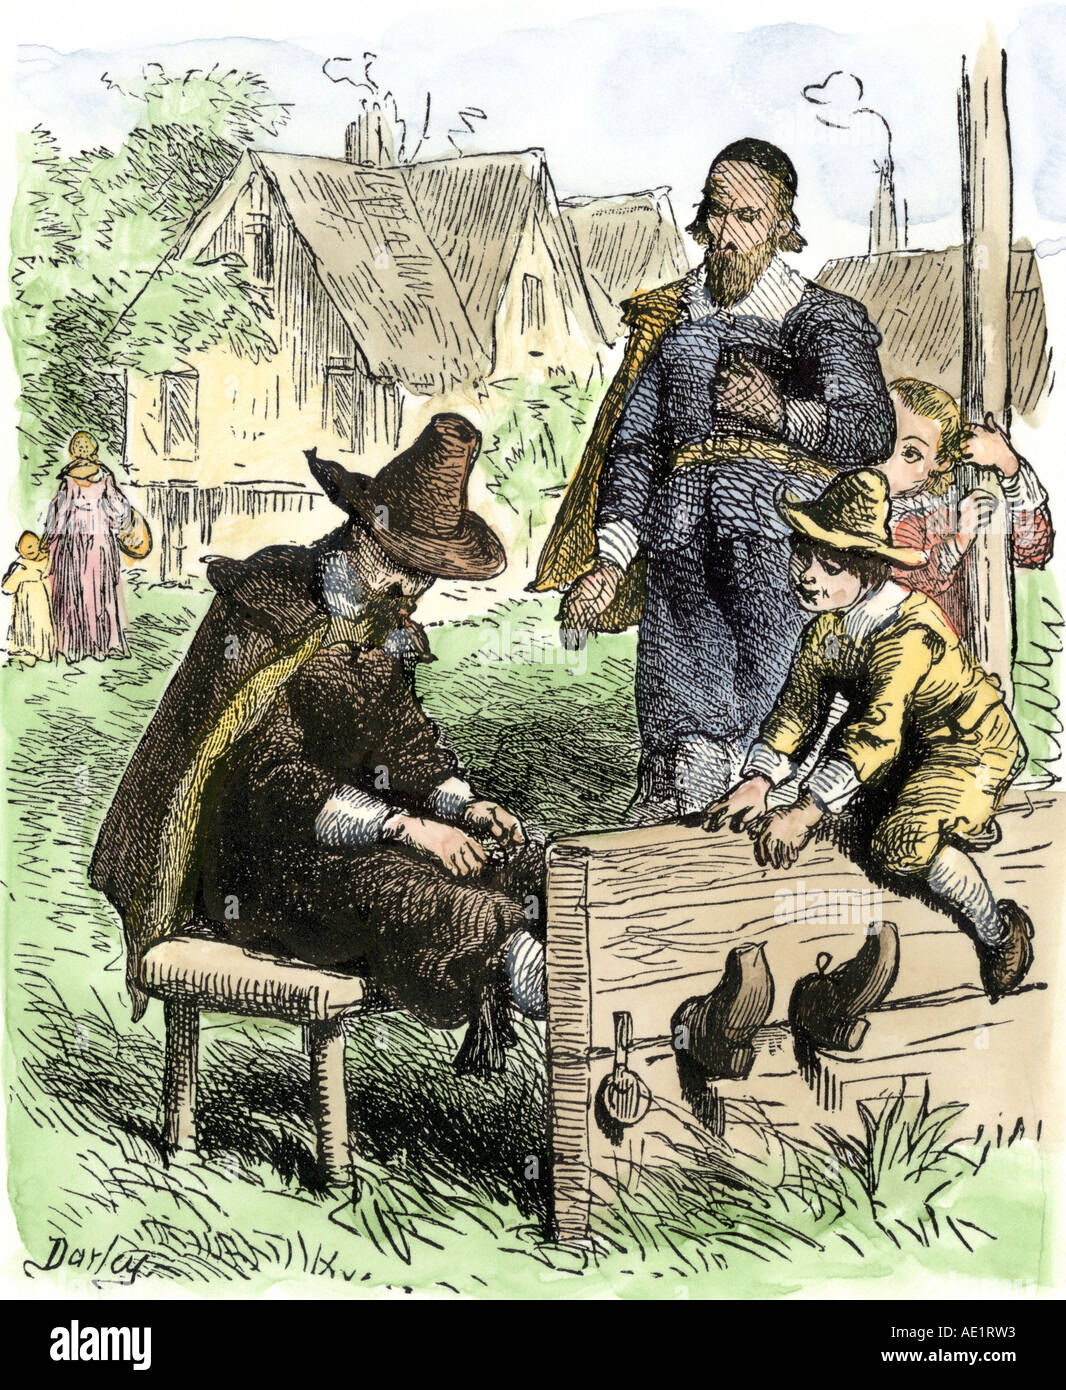 Puritan offender in the stocks Massachusetts Bay Colony 1600s. Hand-colored woodcut Stock Photo